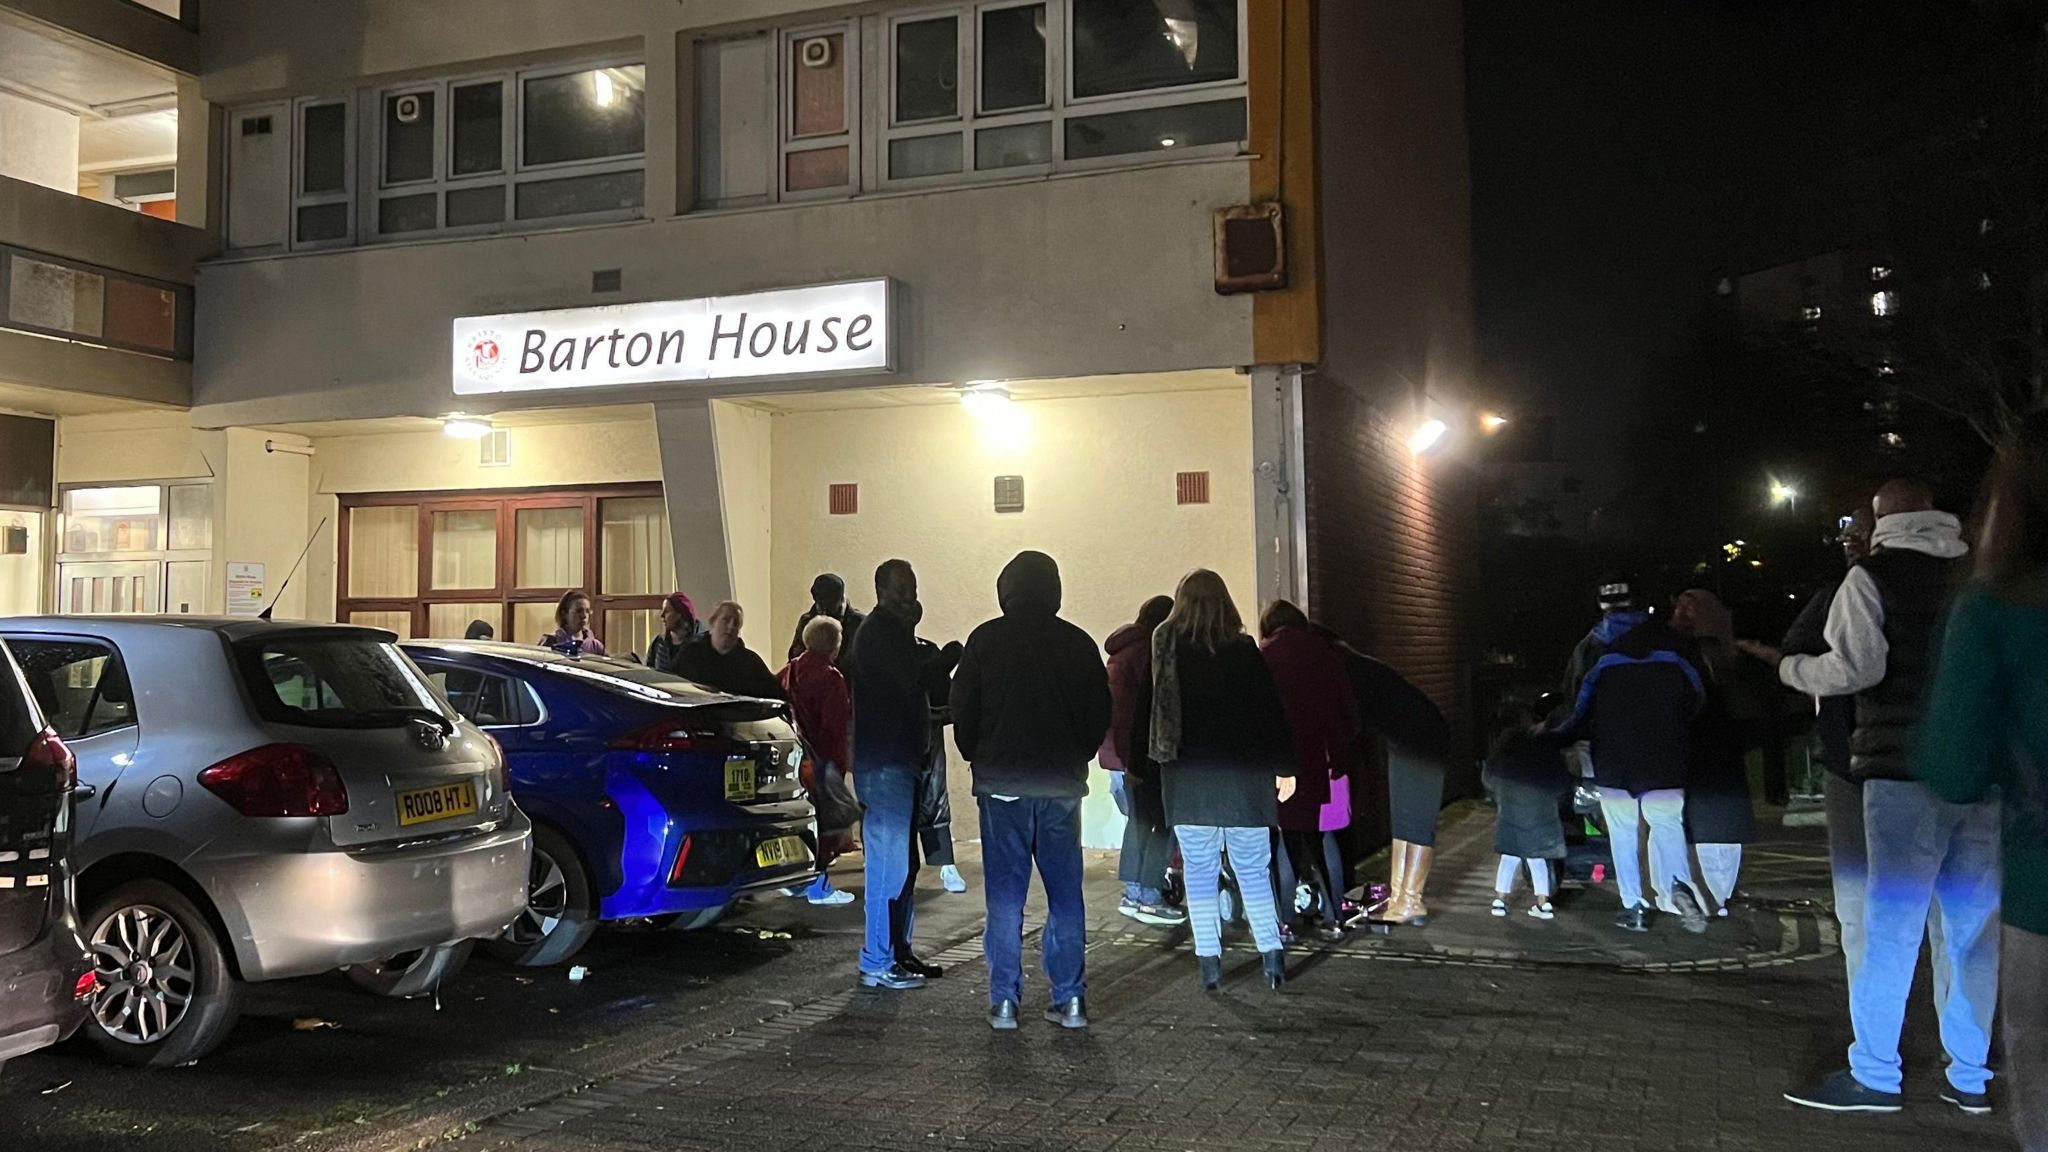 Image of residents being evacuated from Barton House on the night of 14 November